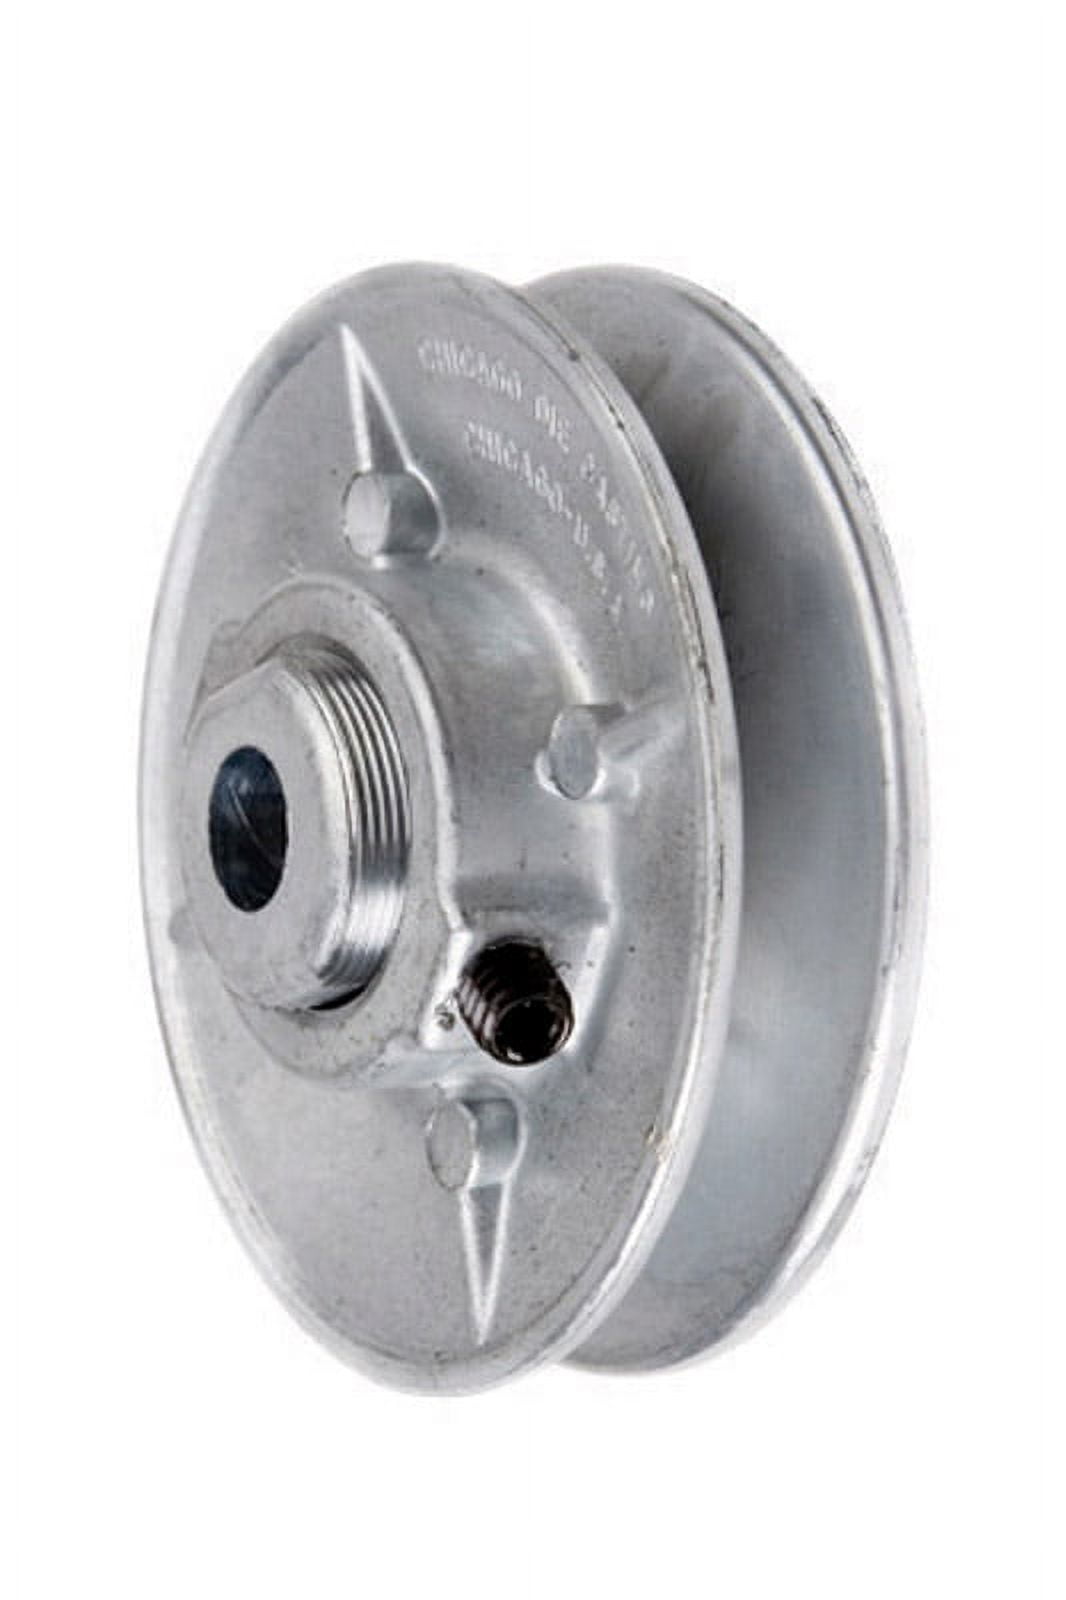 Picture of Chicago Die Casting 2001691 3.25 x 0.5 in. Bore Pulley